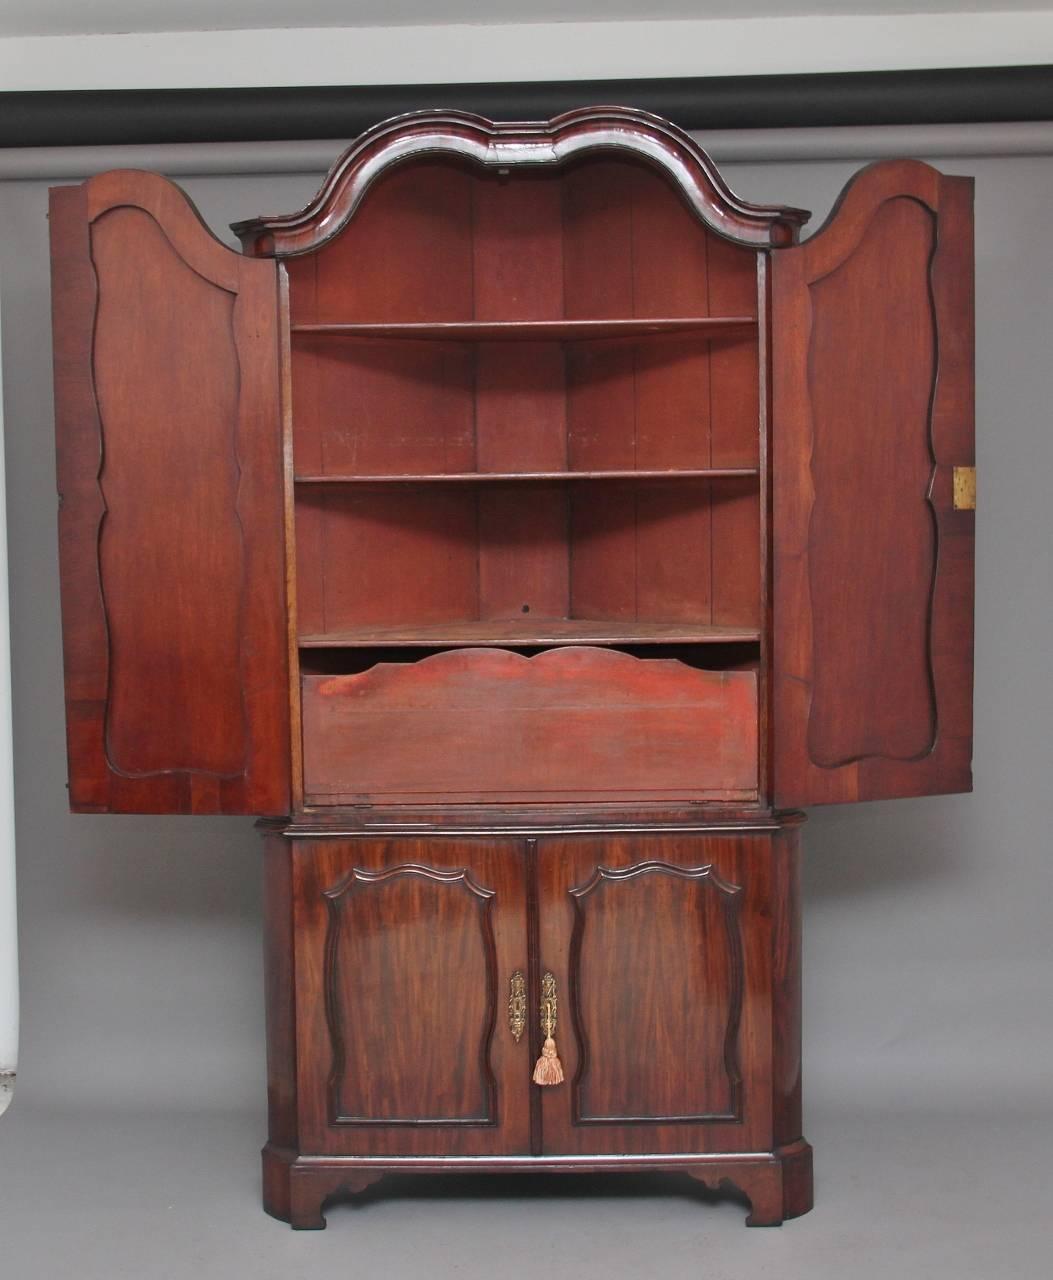 18th century Dutch mahogany corner cupboard with a moulded arched cornice, the top section having two paneled doors with shaped and moulded beading around the panels, opening to reveal three fixed shelves and a drop down flap at the bottom of the